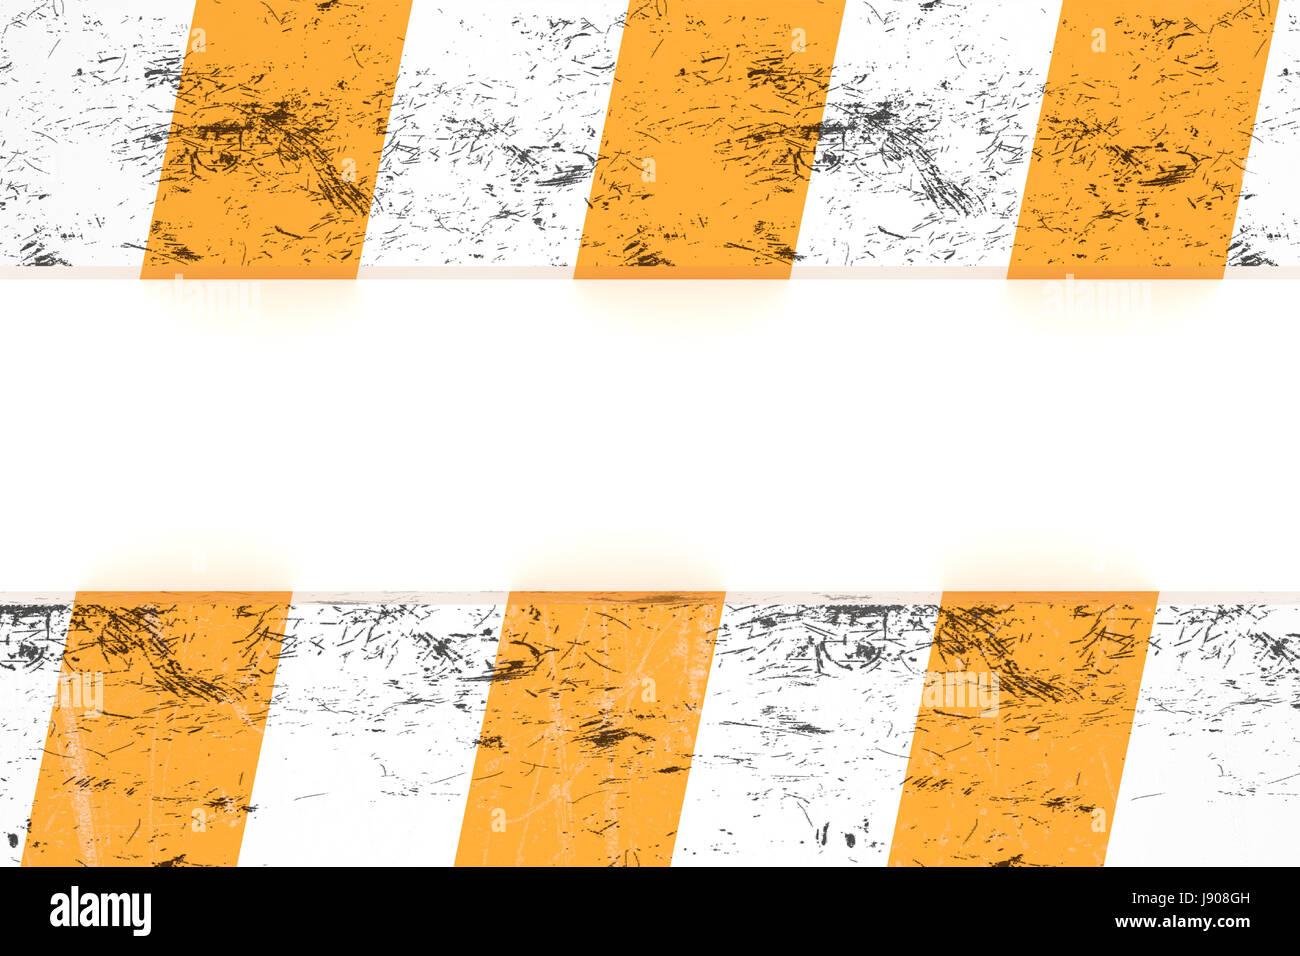 Isolated warning zone pattern in orange and white stripes Stock Photo